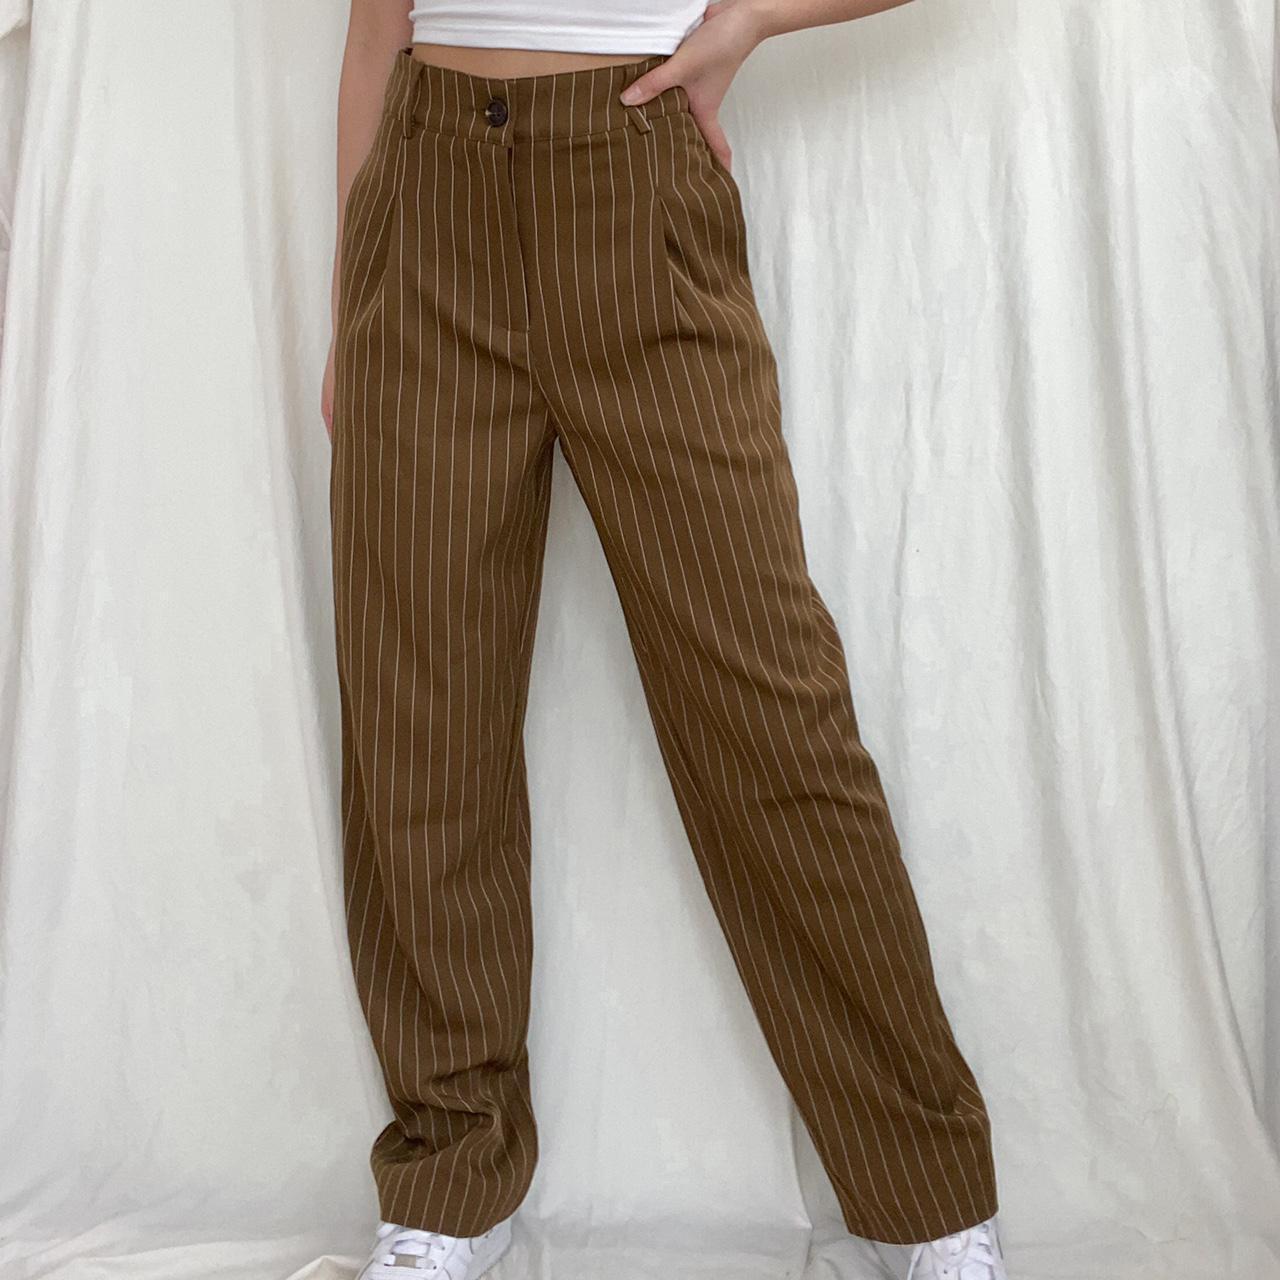 Product Image 3 - Brown Pinstripe Wide Leg Trousers

Flowy